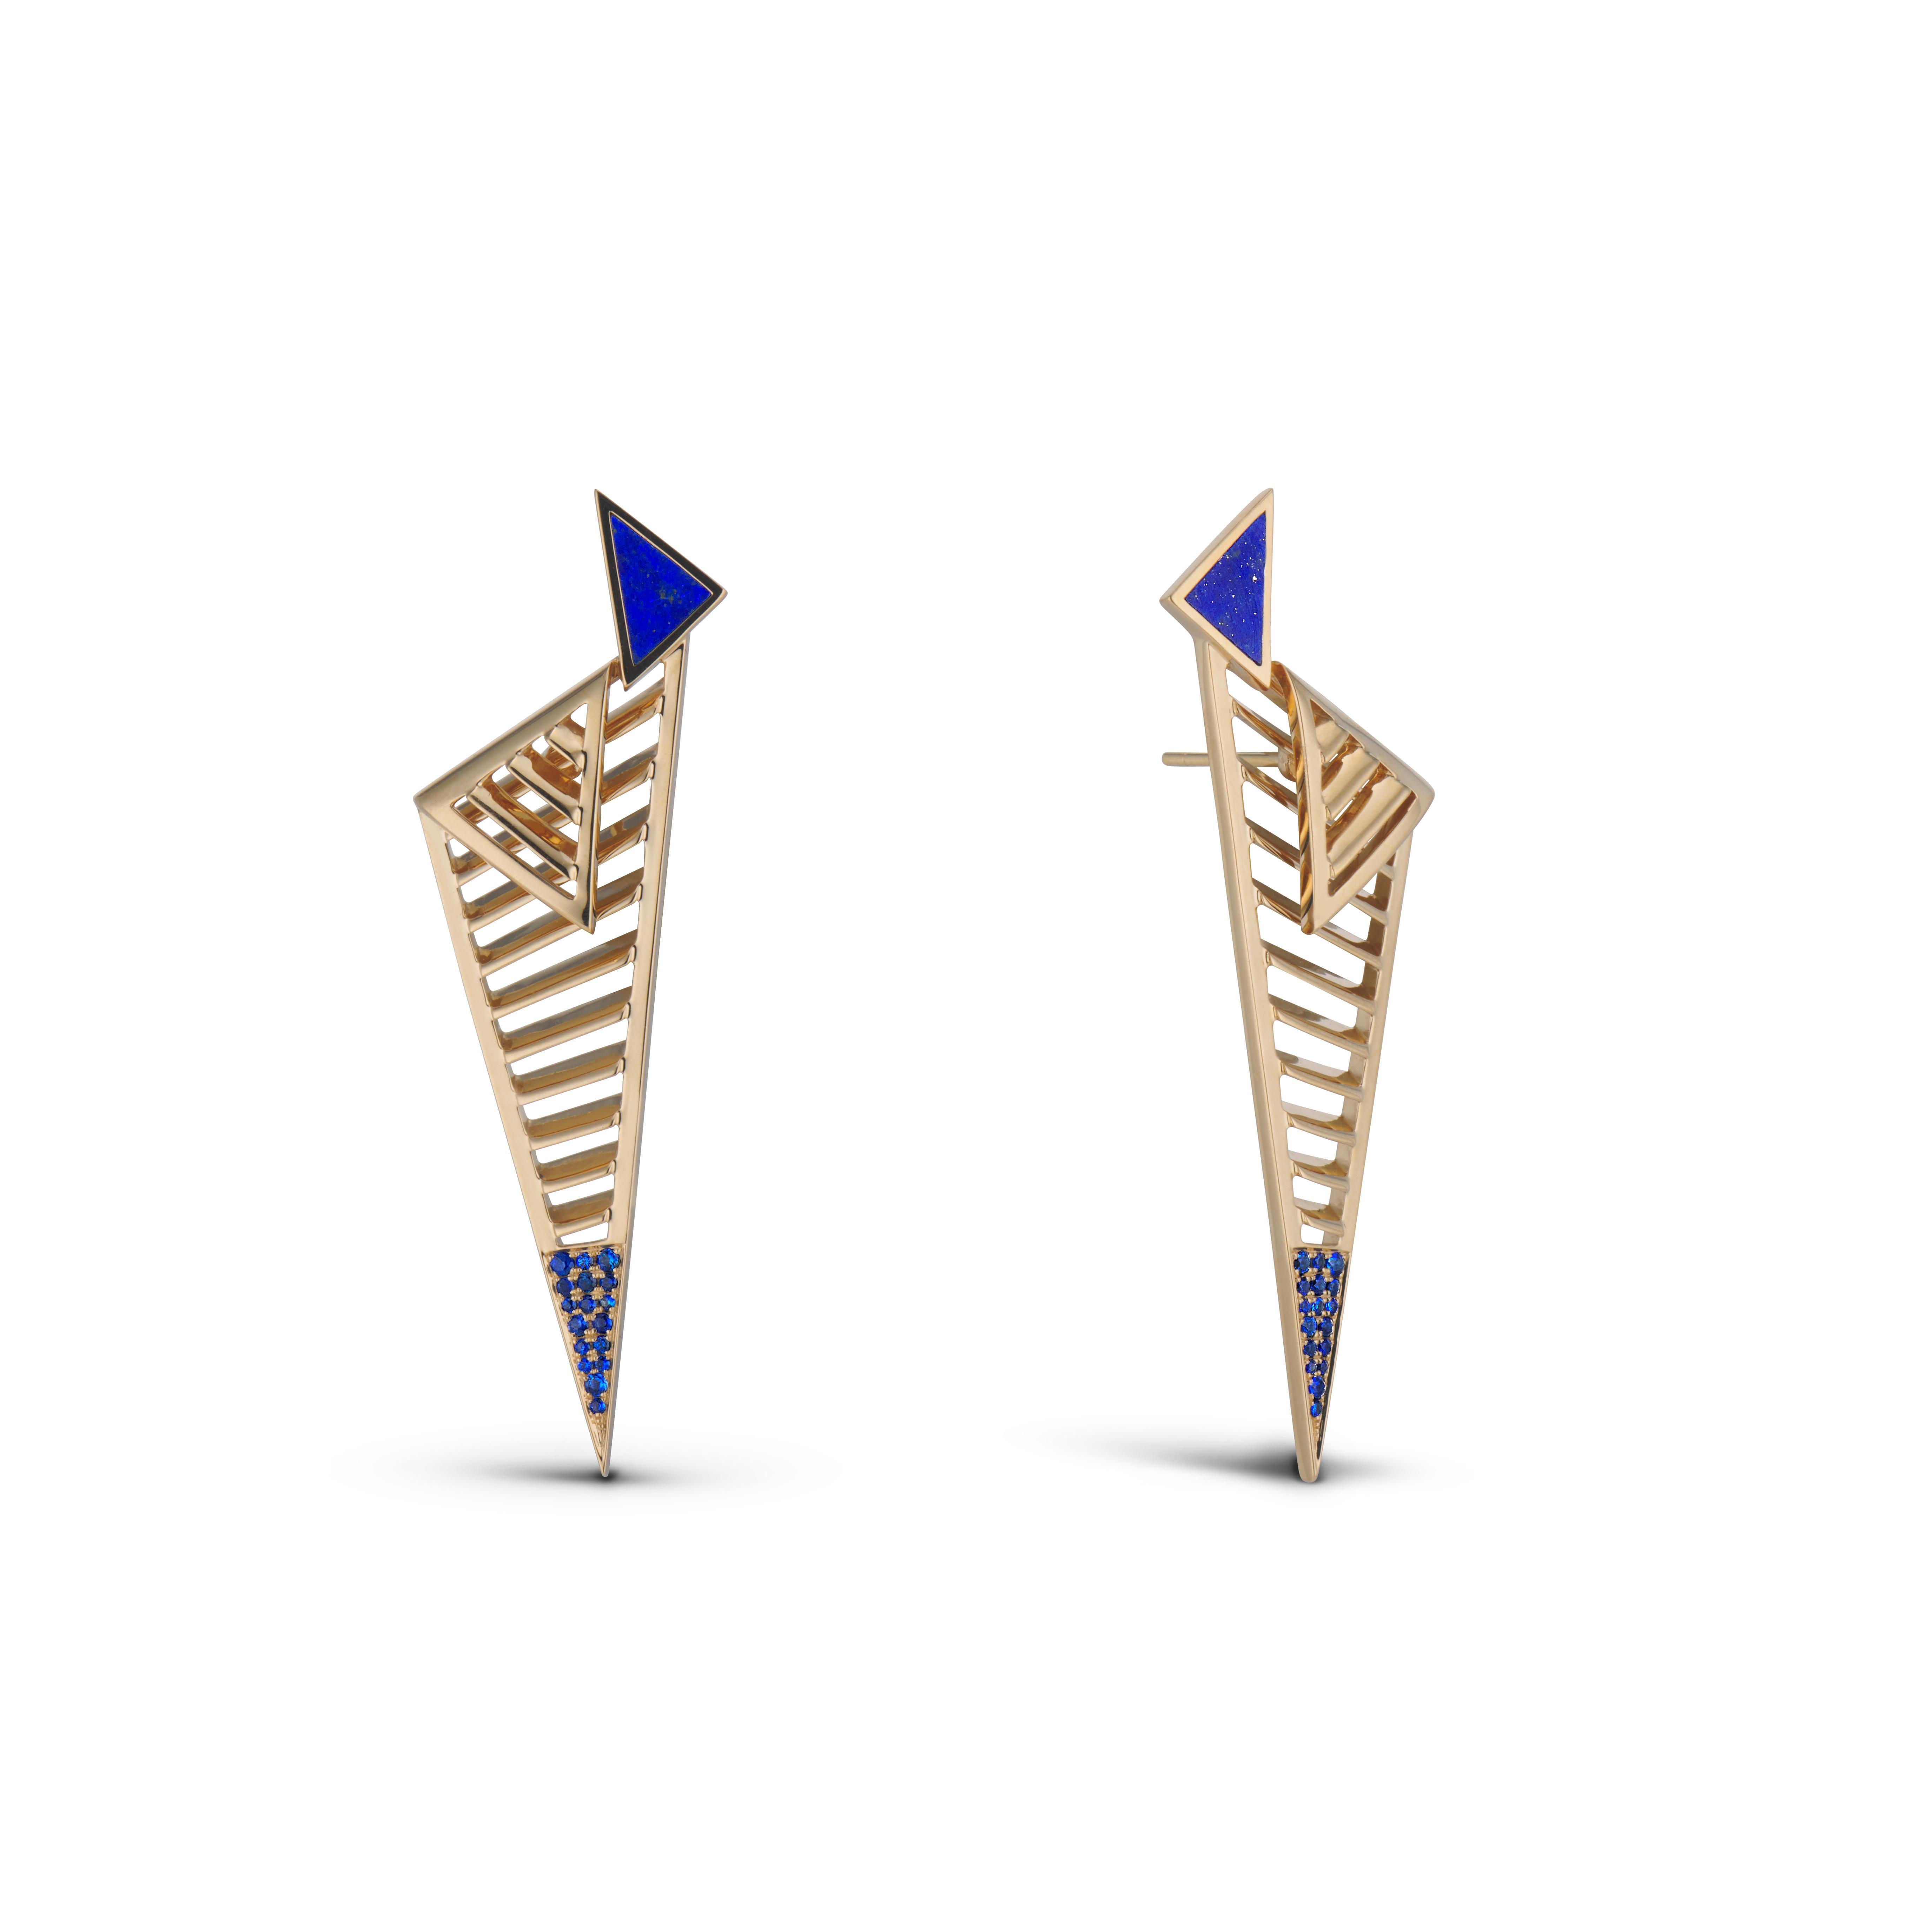 The FENESTRA ARC EDGE earring embodies the innate fierceness that resides within us all. Every architectural cut-out in these earrings beckons forth confidence and strength as we embark on each new day.

The ARC EDGE stands as a striking statement